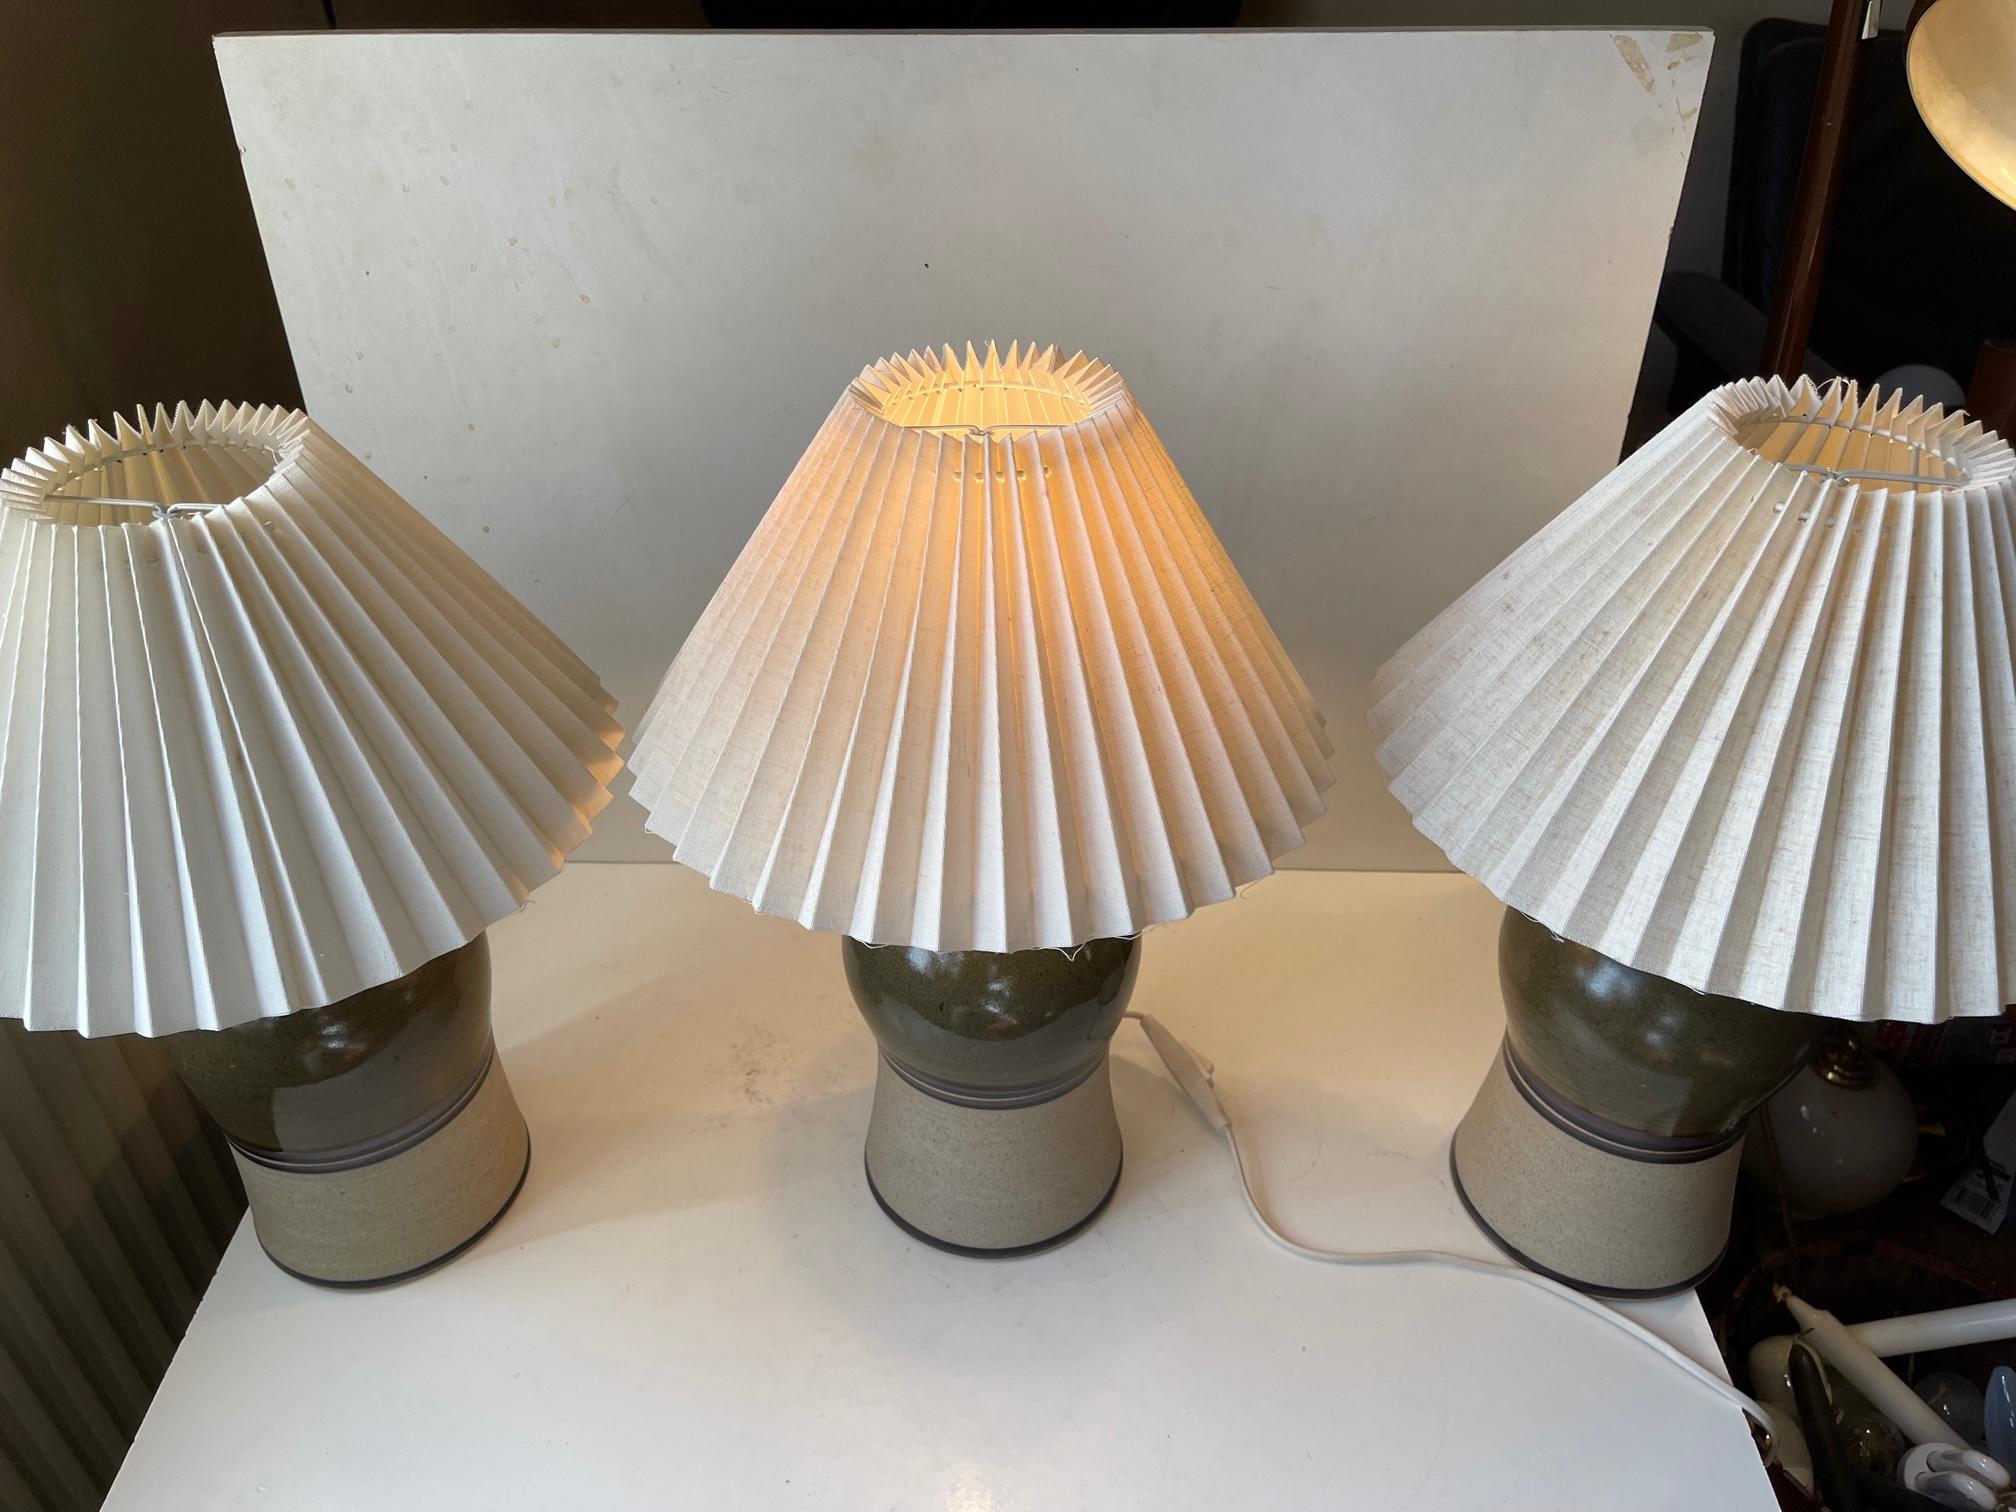 Vintage Scandinavian Table Lamps Glazed with Stripes, Set of 3 For Sale 2